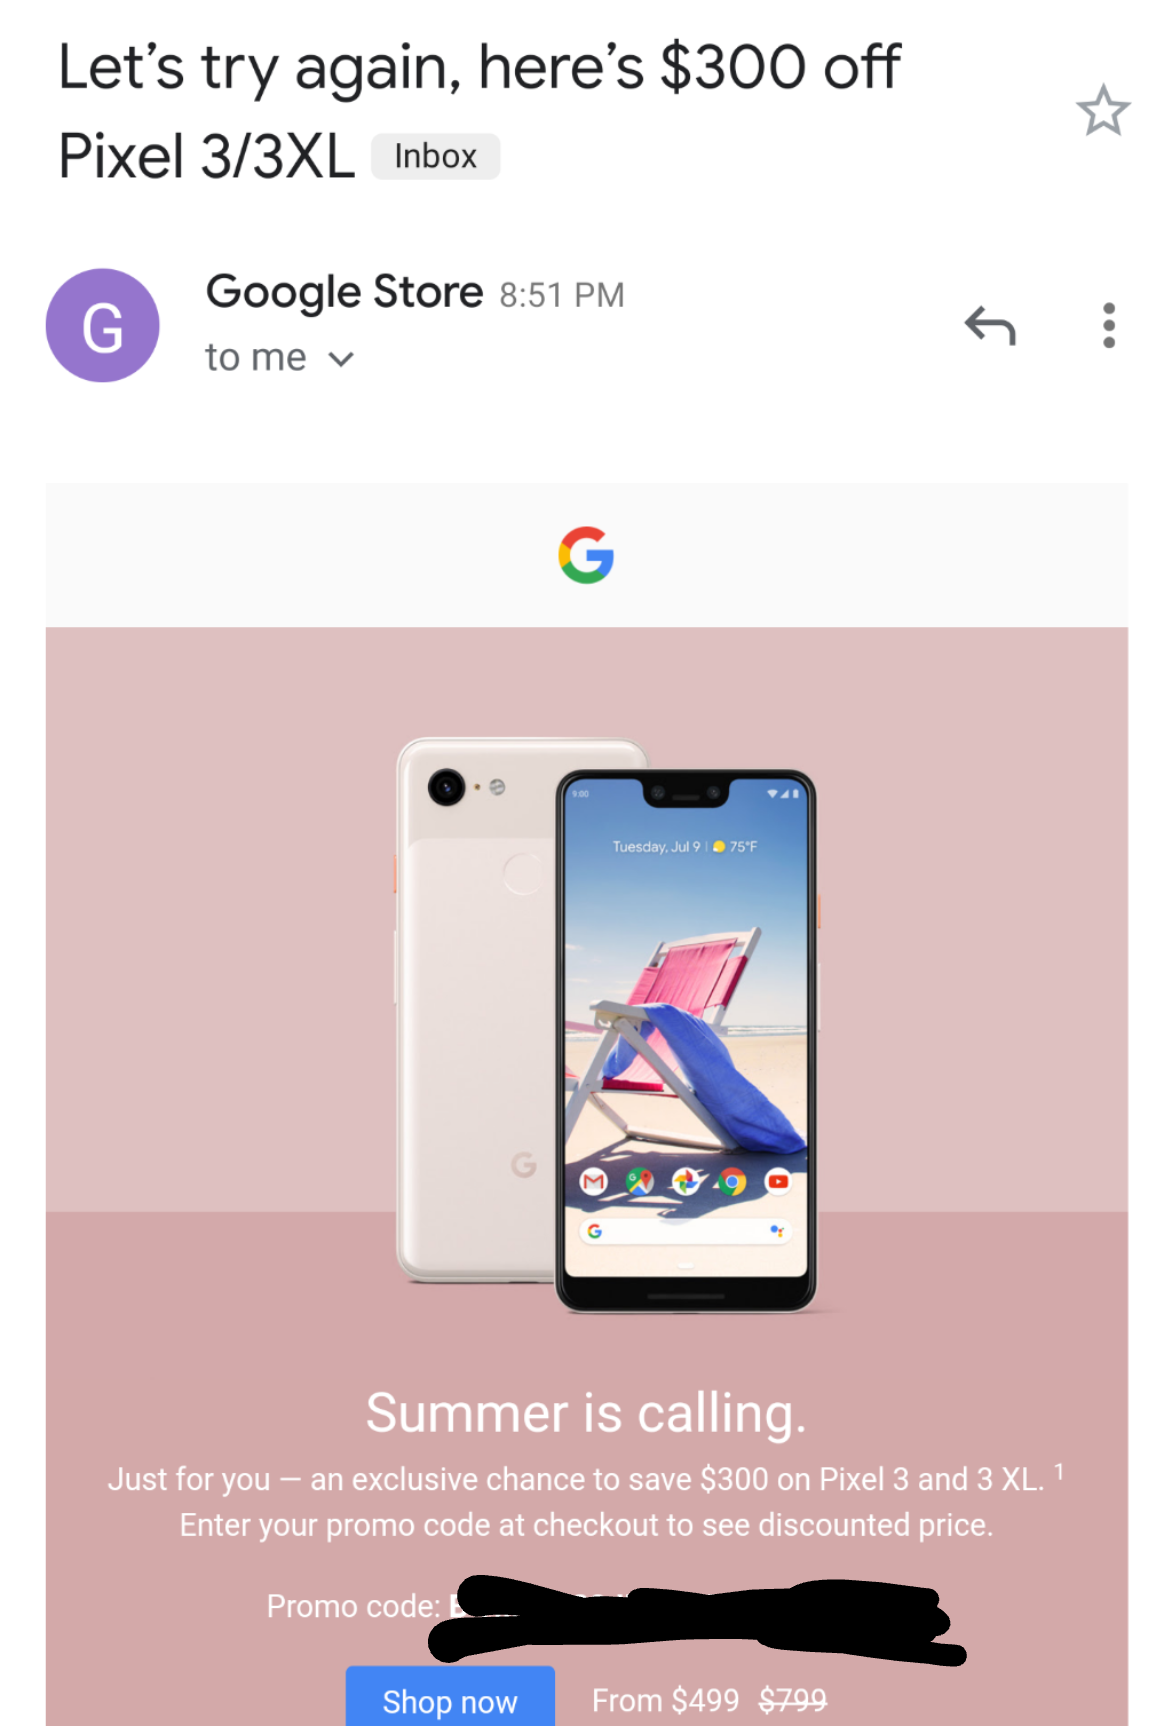 google-store-promo-code-discount-pixel-3-by-300-9to5google